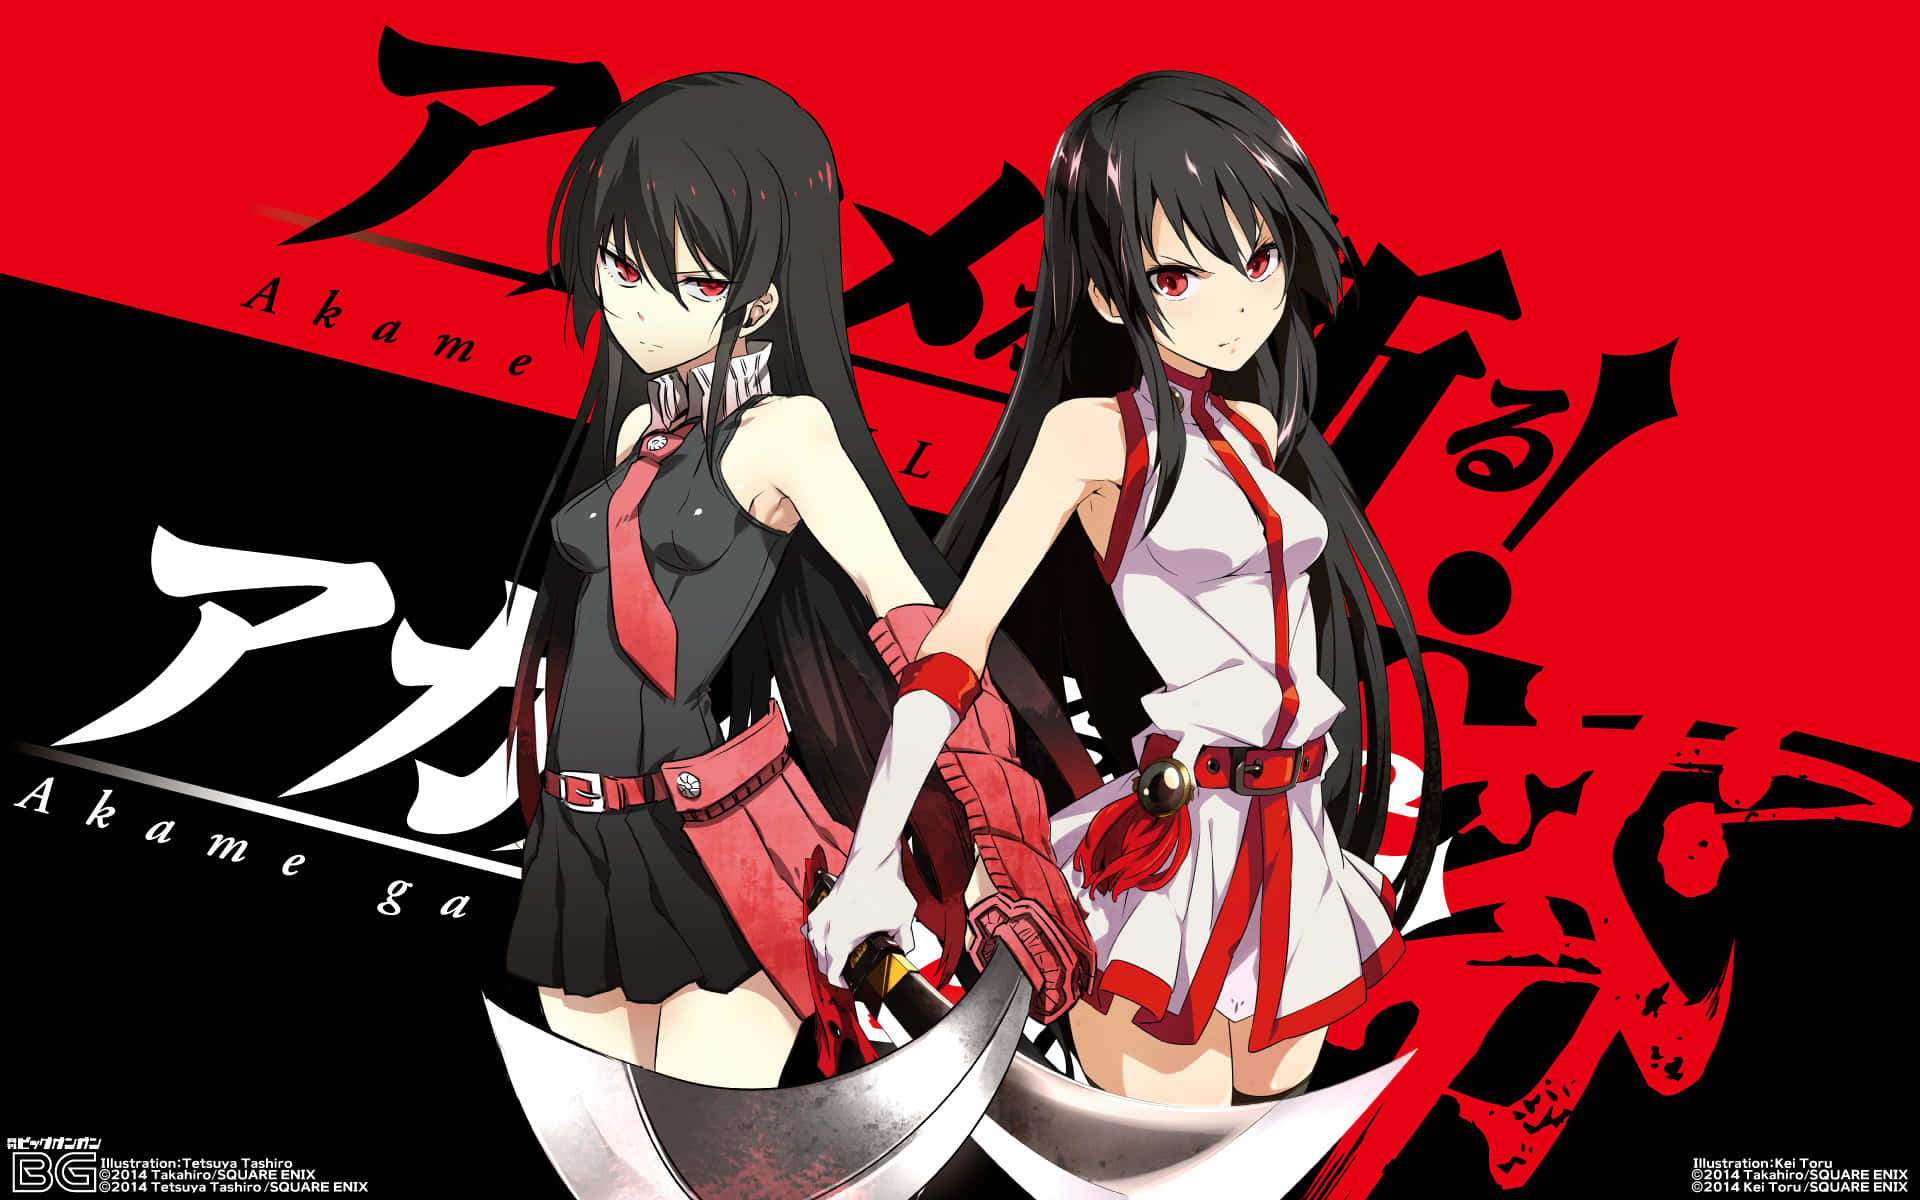 Two Anime Girls With Swords In Front Of A Red And Black Background